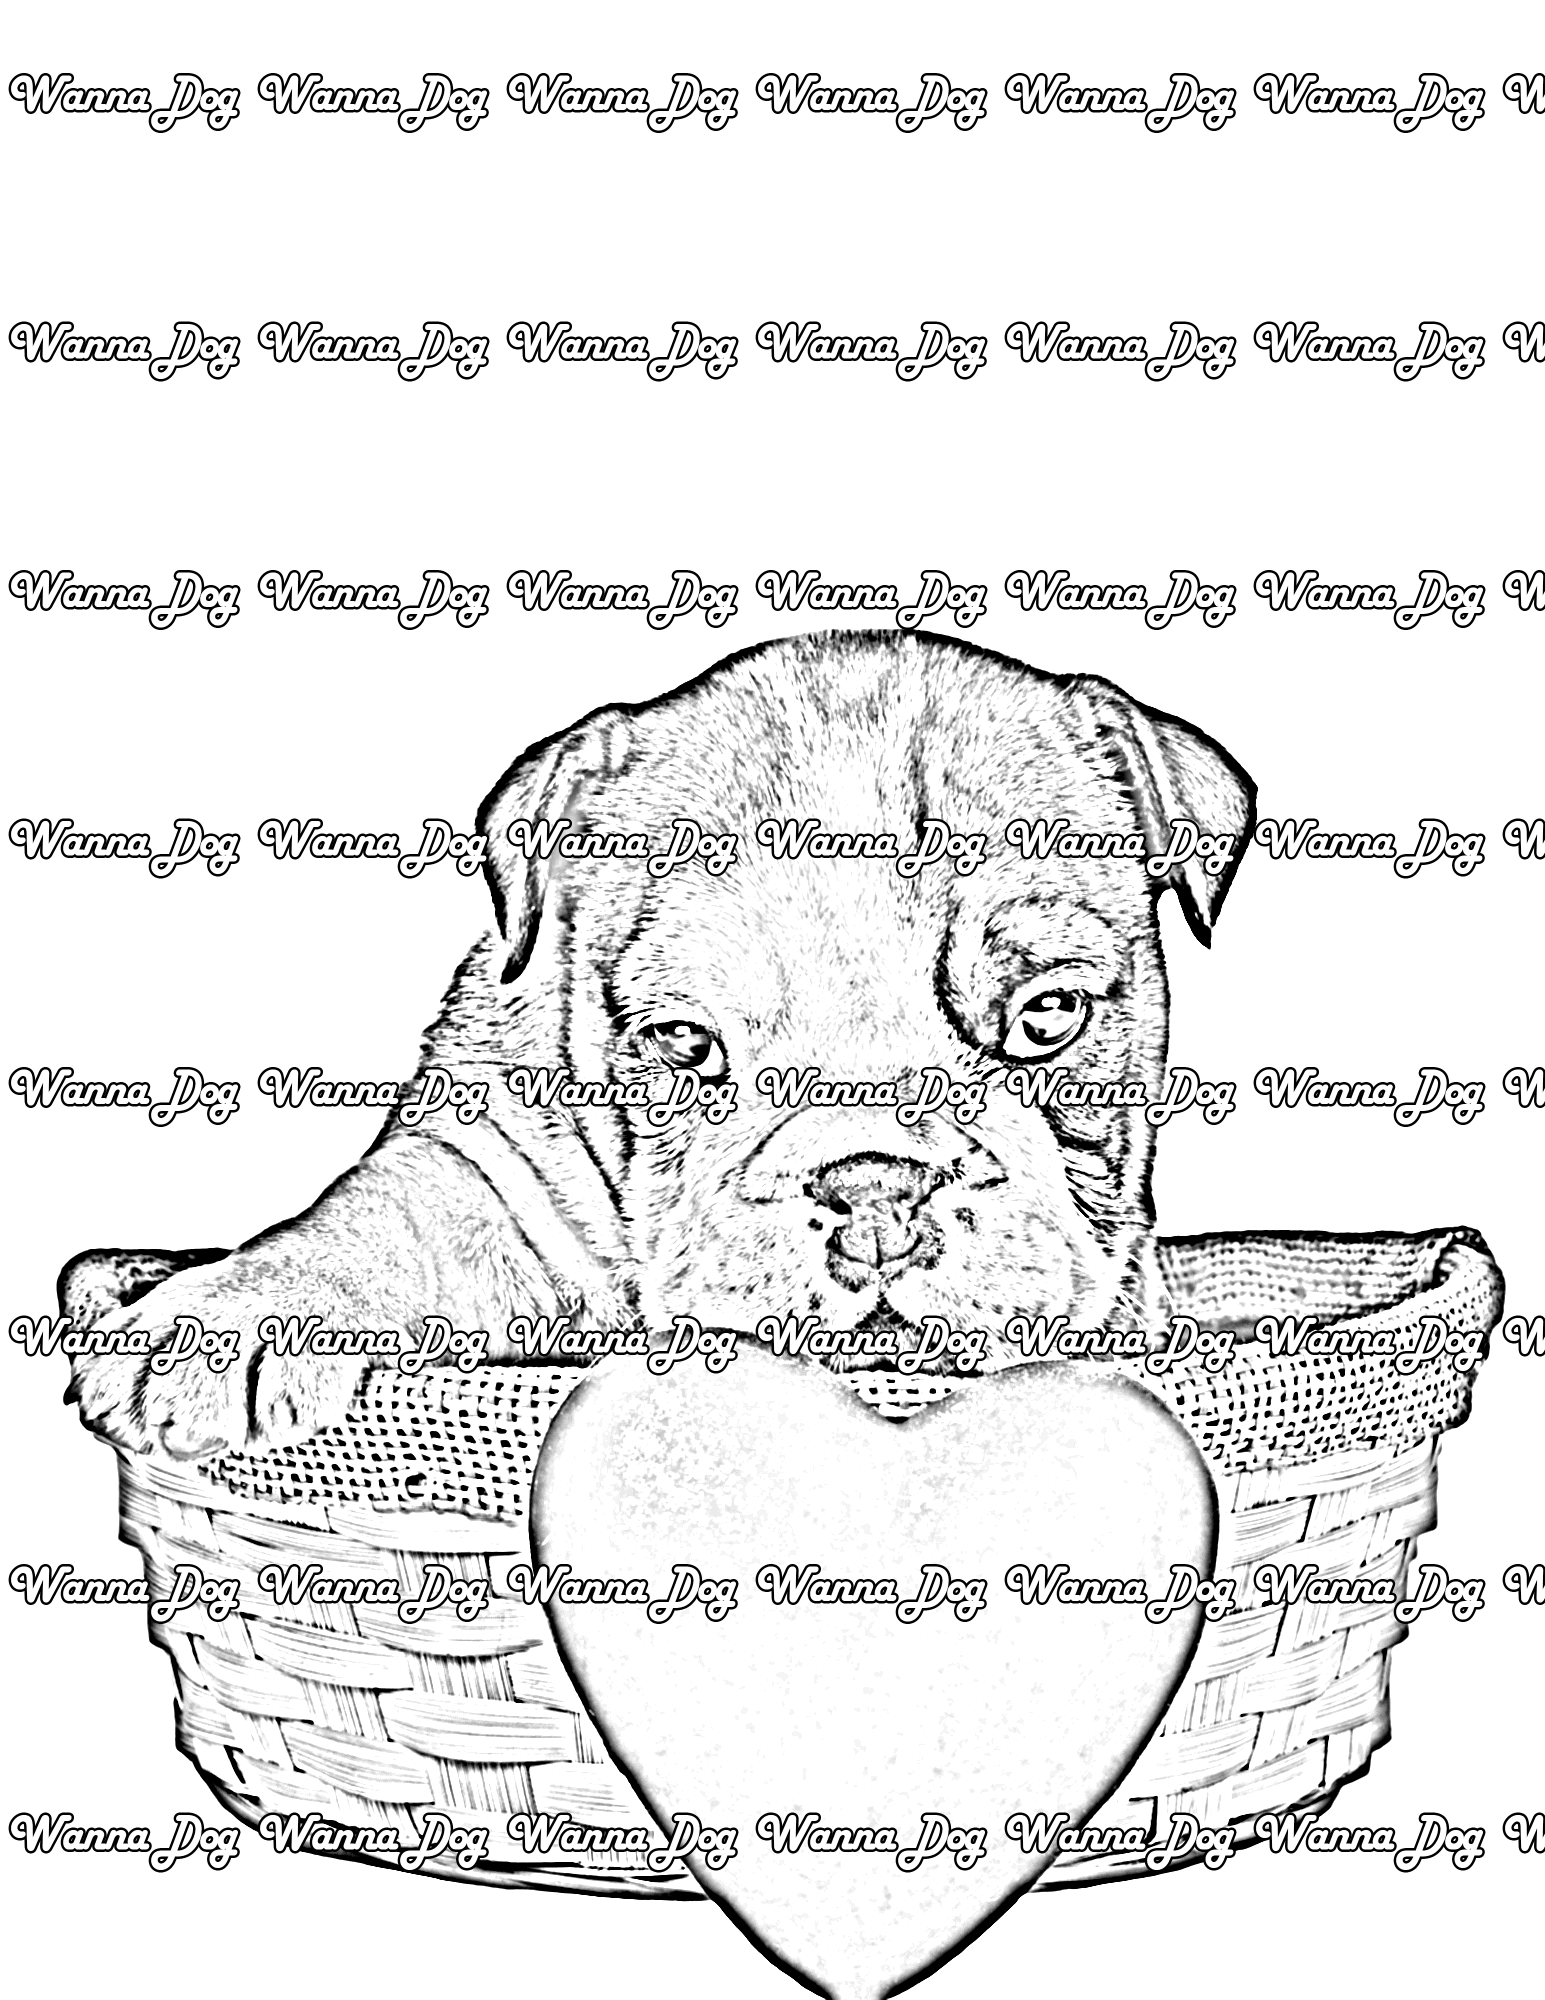 Bulldog Puppy Coloring Page of a Bulldog Puppy sitting in a basket and a heart plush